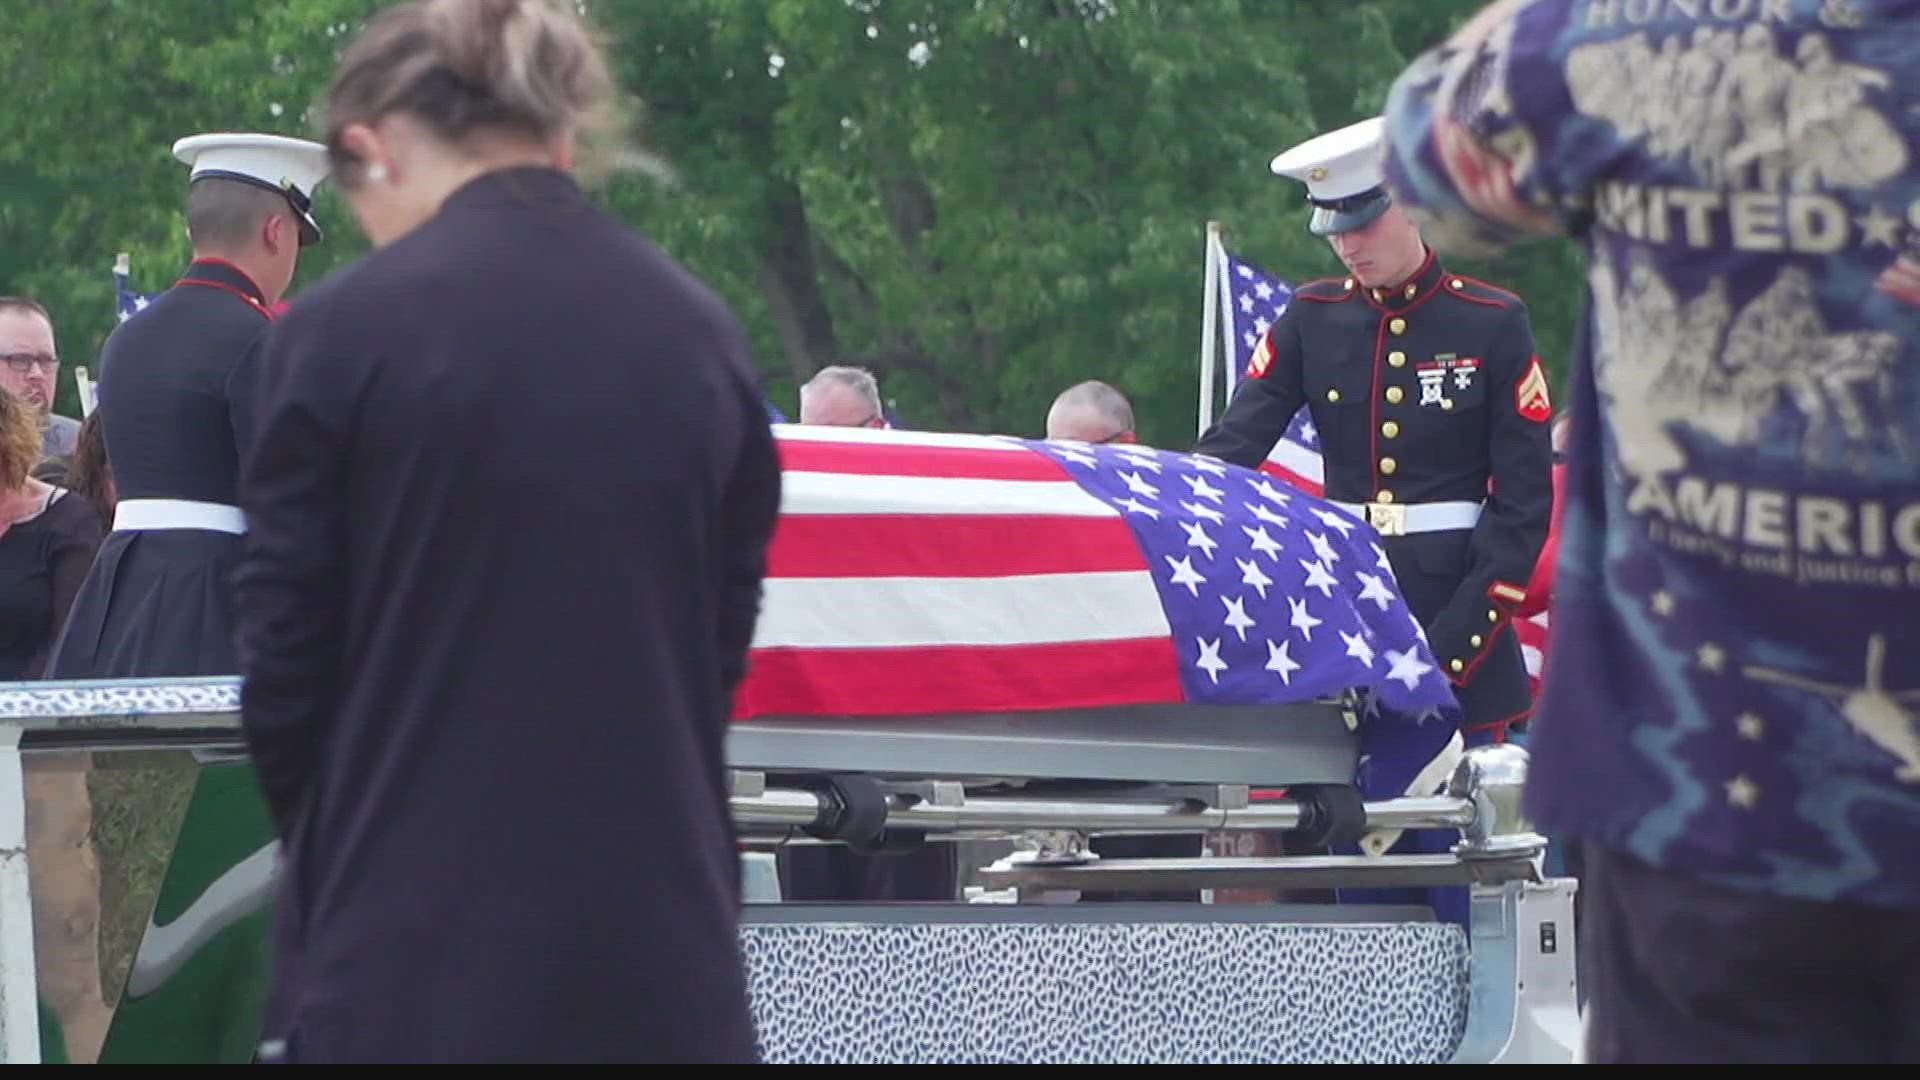 Funeral services were held Tuesday for U.S. Marines Cpl. Humberto Sanchez in his hometown of Logansport.